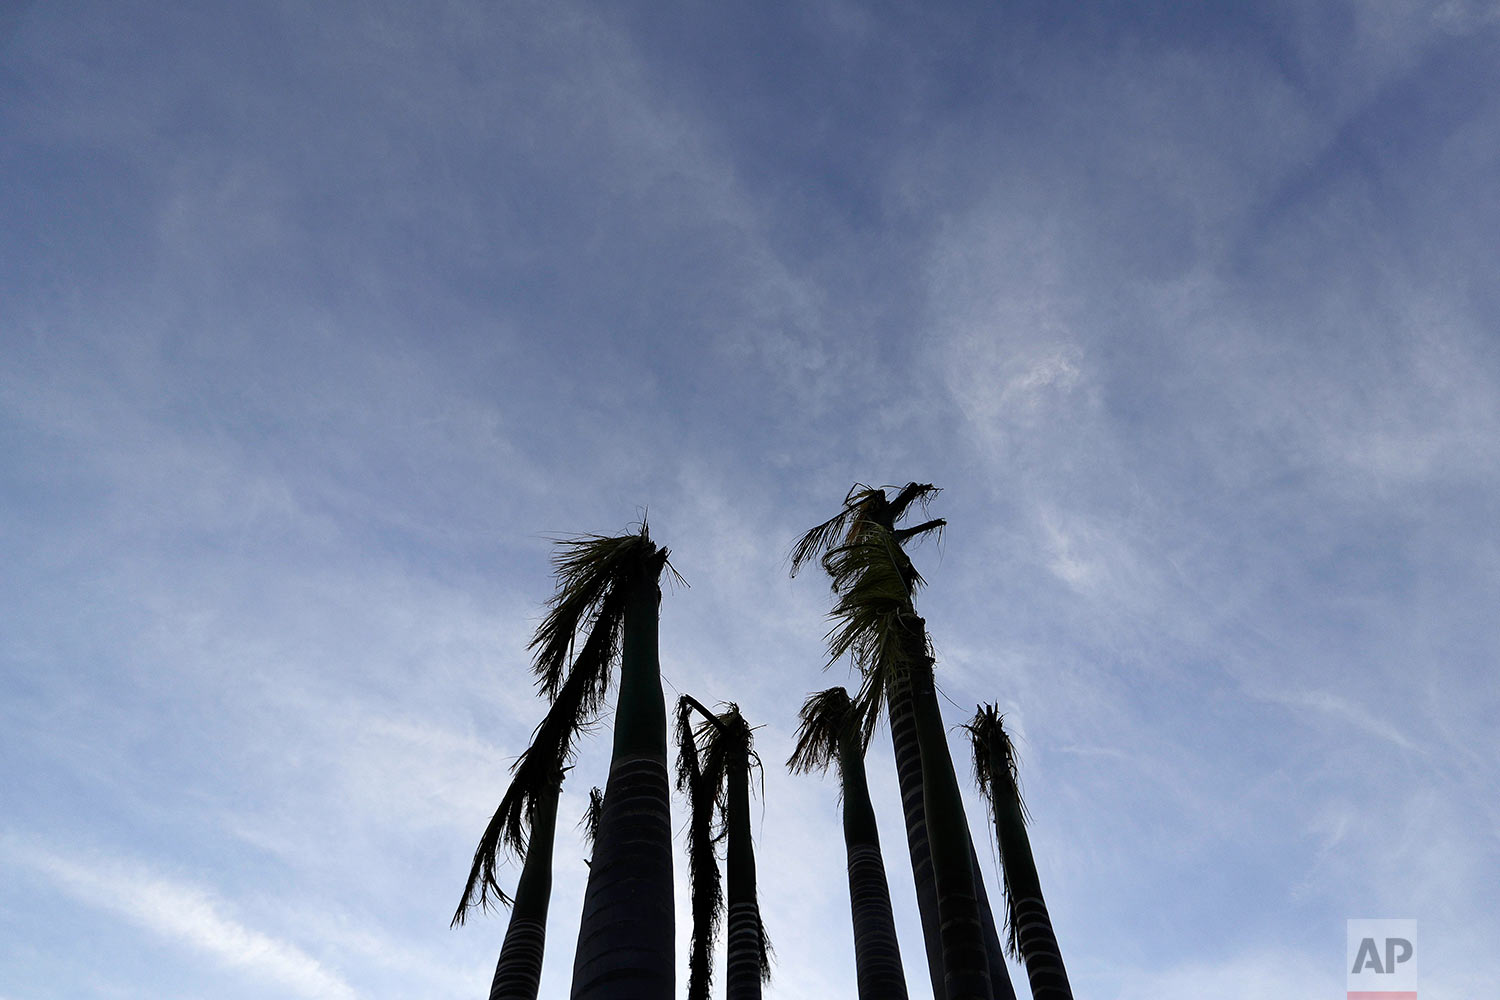  Pam trees stand ripped of their fronds in the aftermath of Hurricane Irma in Marco Island, Fla., Monday, Sept. 11, 2017. (AP Photo/David Goldman) 